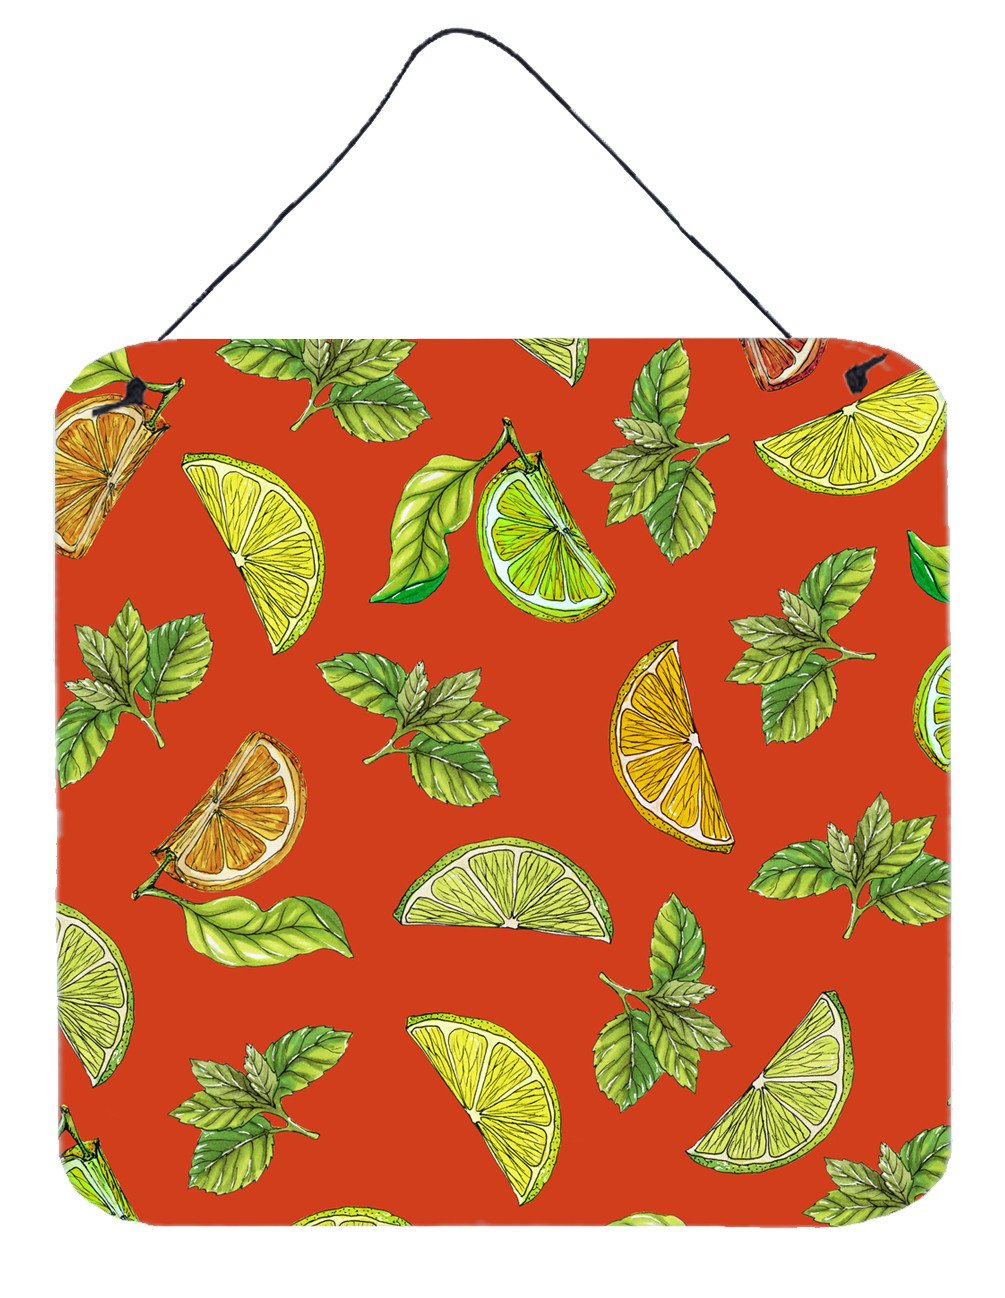 Lemons, Limes and Oranges Wall or Door Hanging Prints BB5205DS66 by Caroline's Treasures